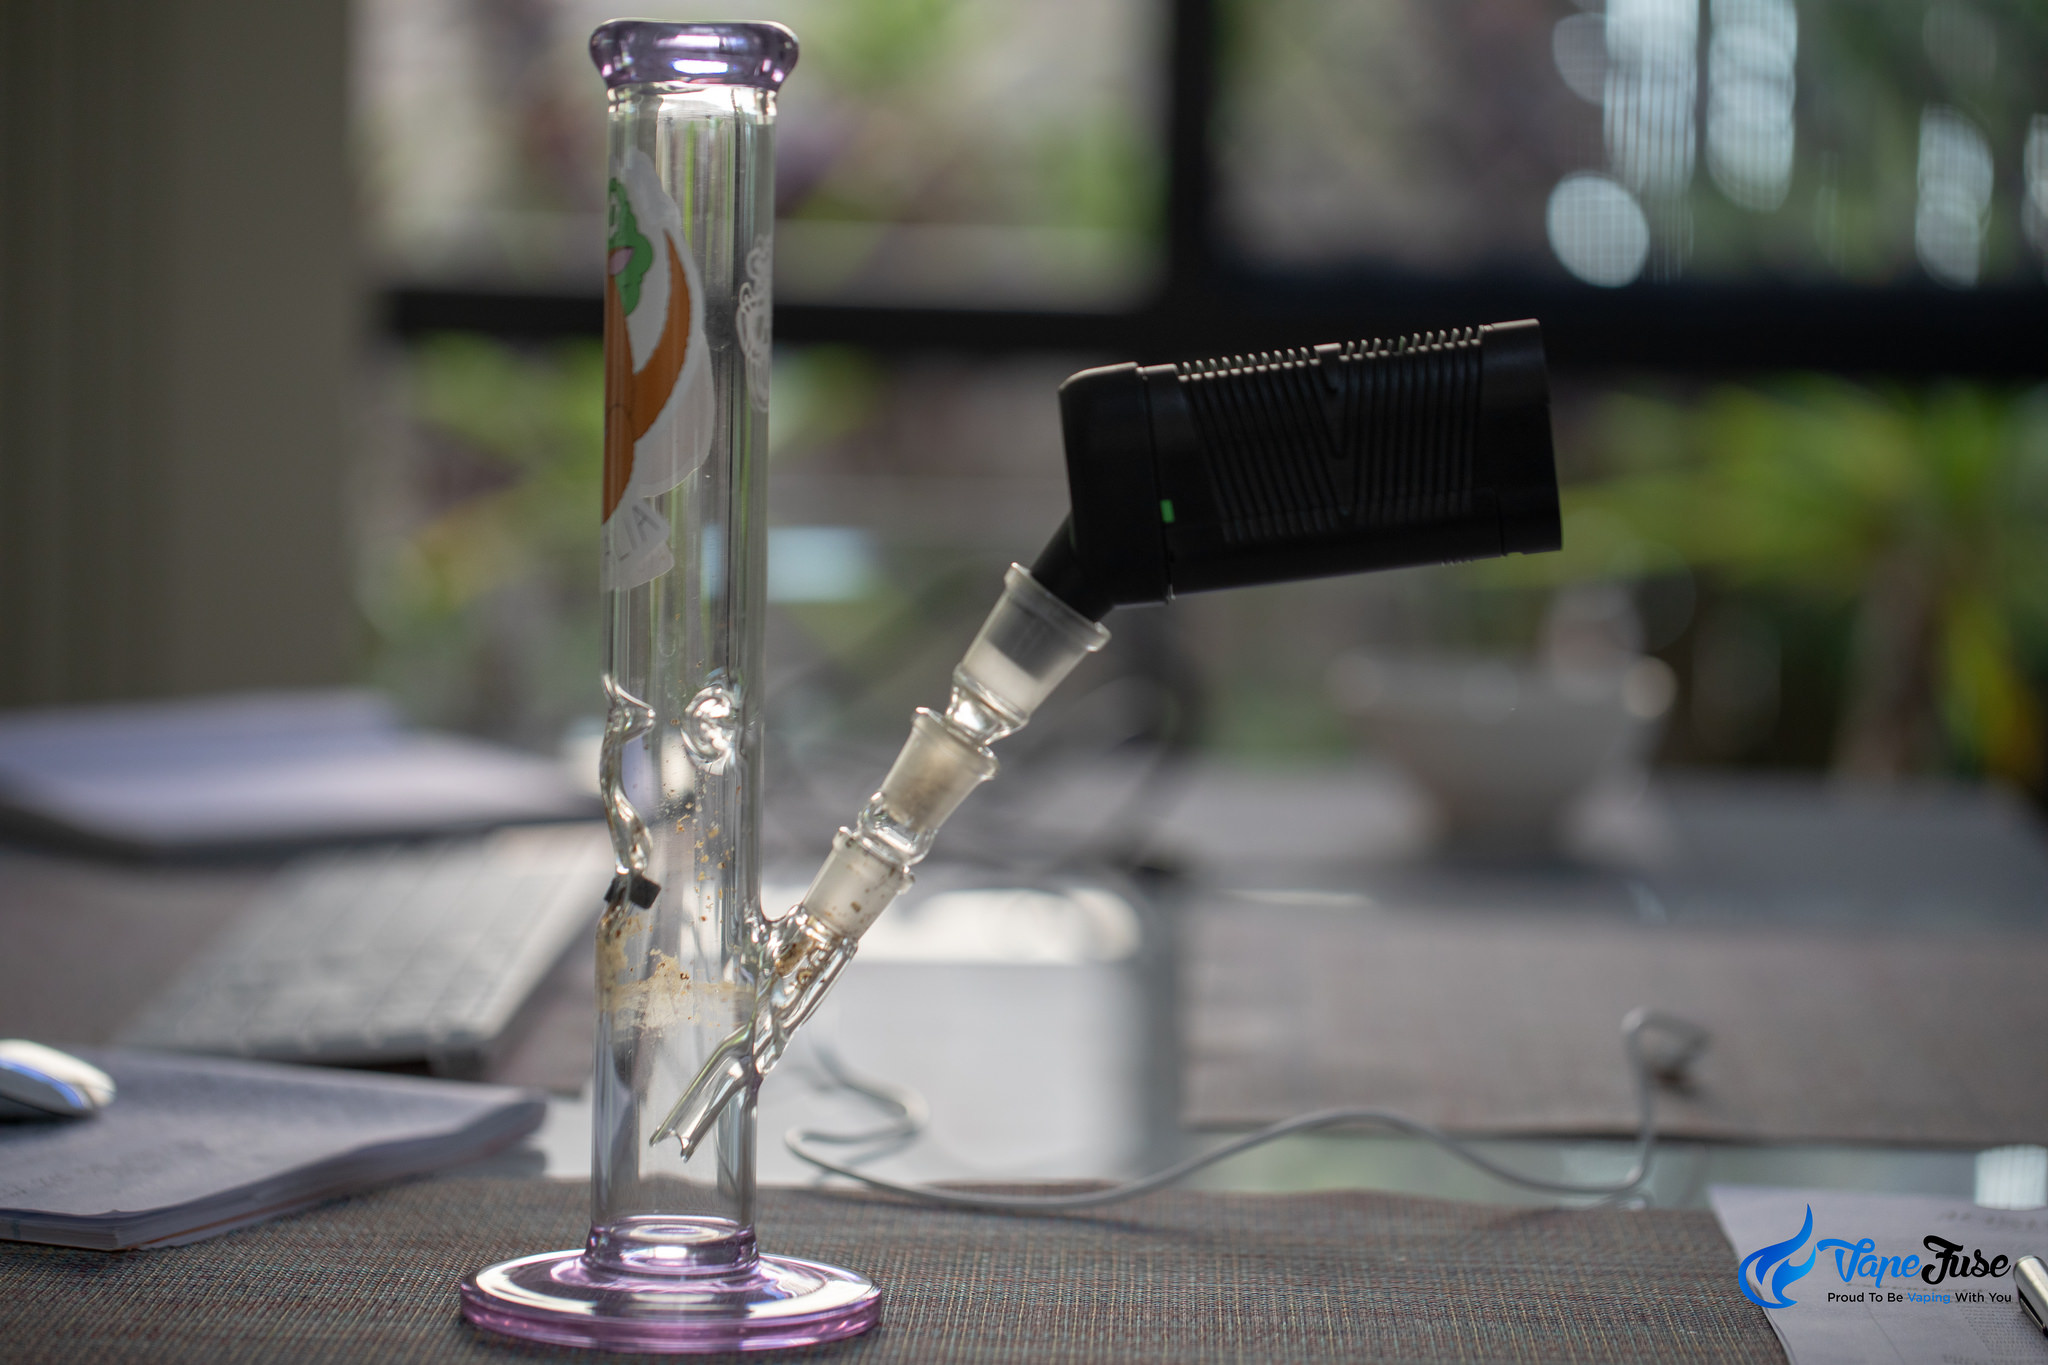 Vivant Alternate Vaporizer in use with water pipe